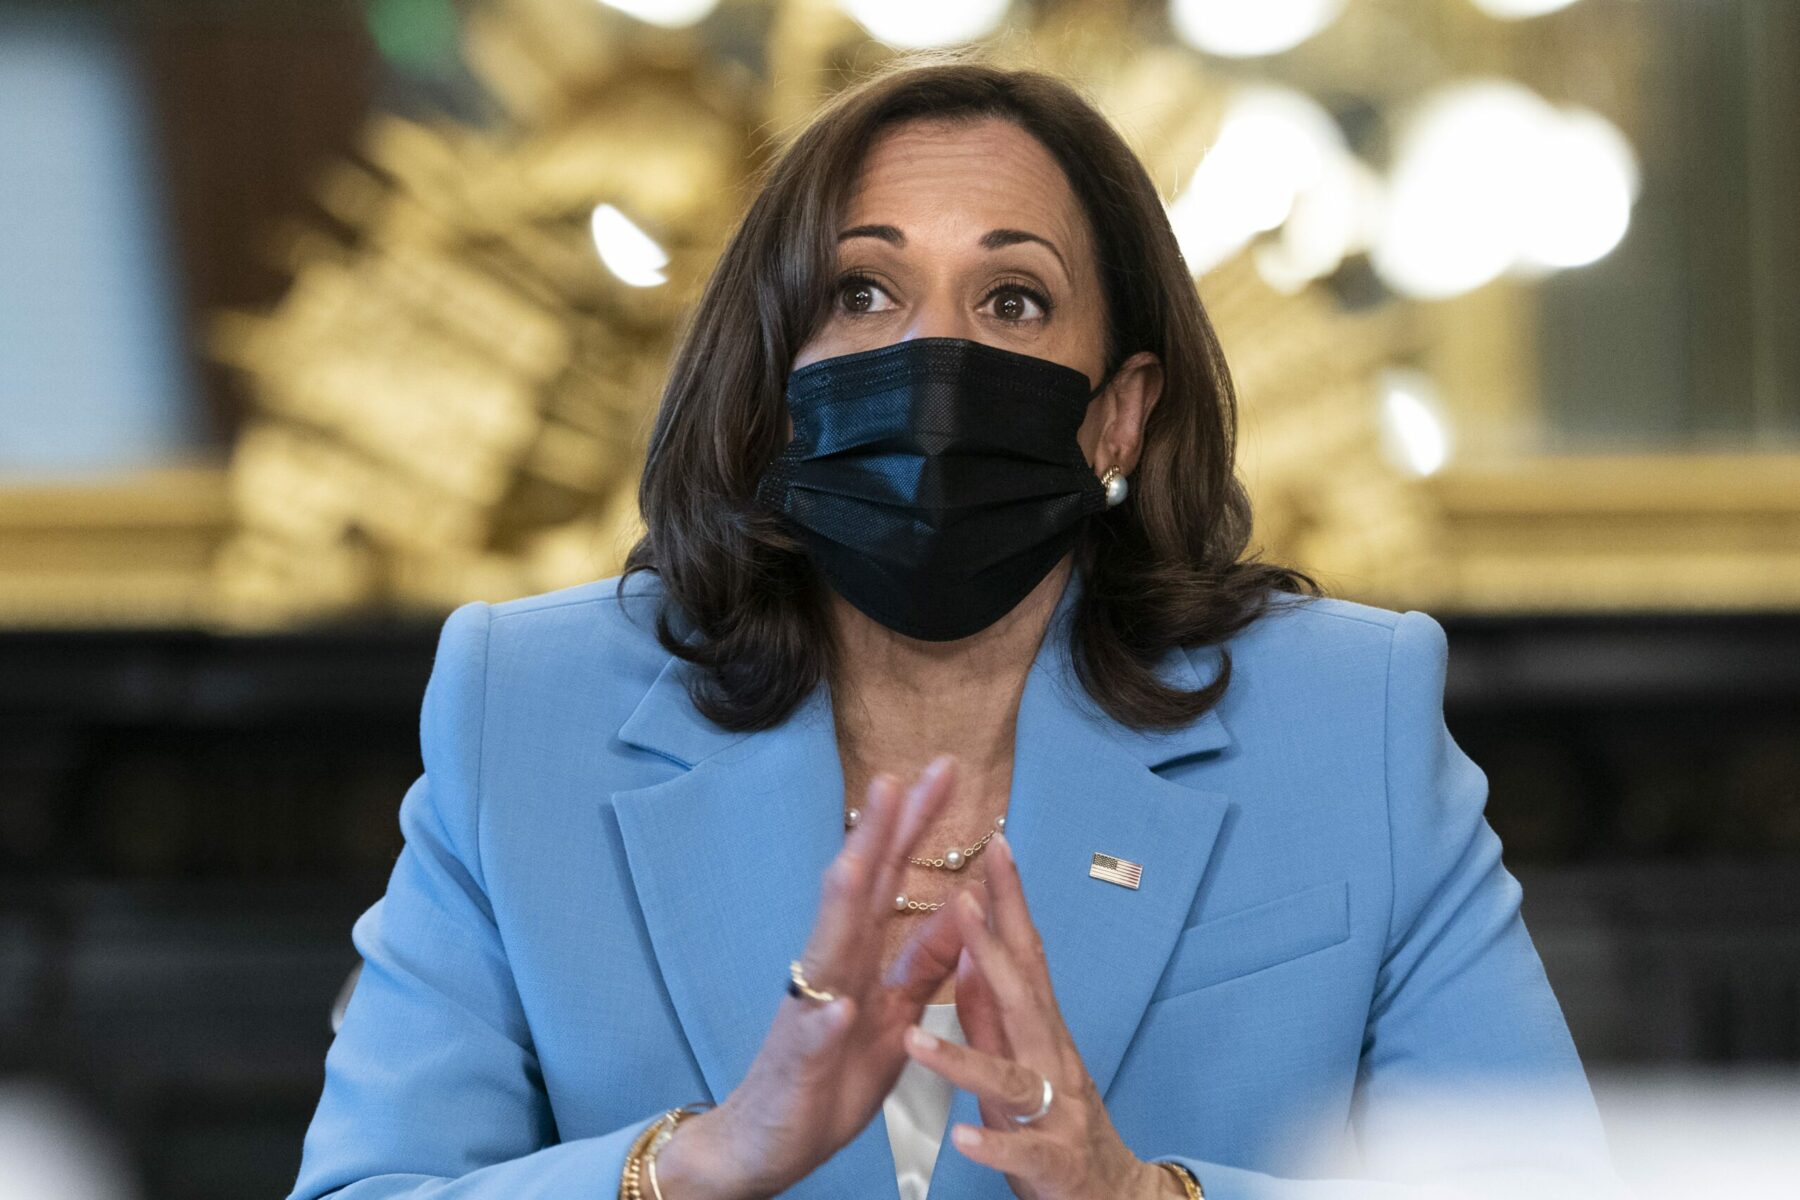 Vice President Kamala Harris wears a blue suit and black mask as she speaks at an event.